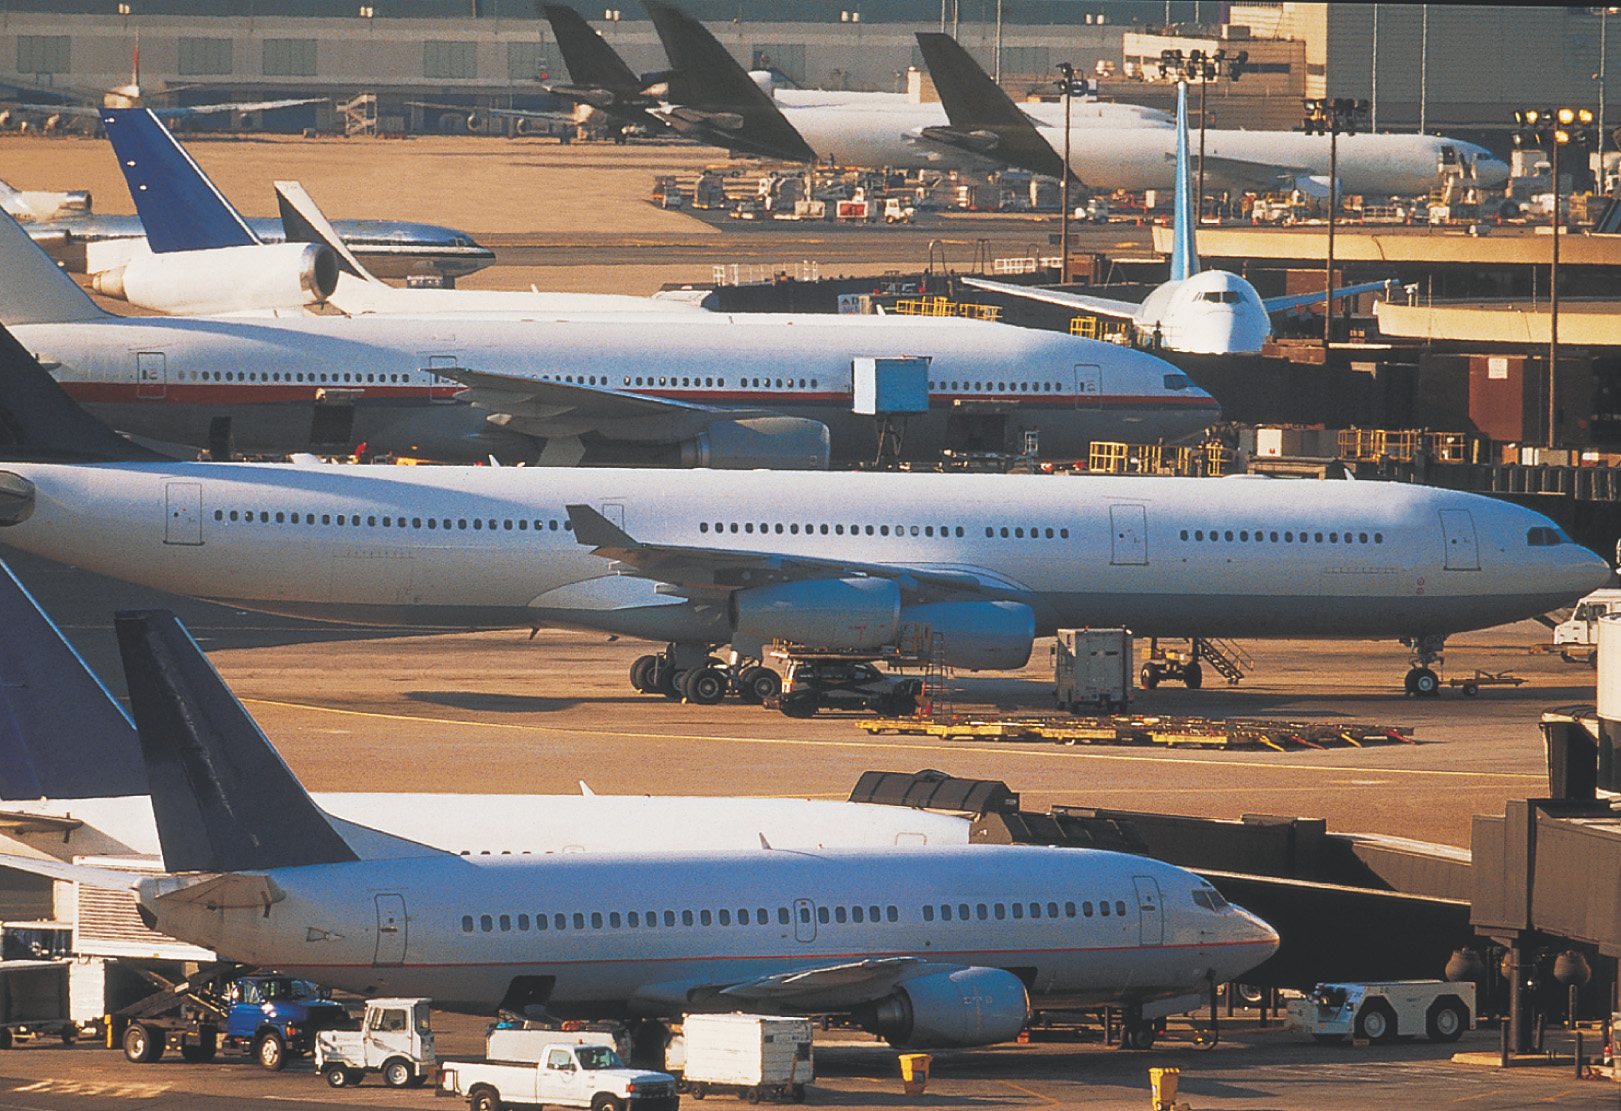 Photo: passenger planes parked on a tarmac